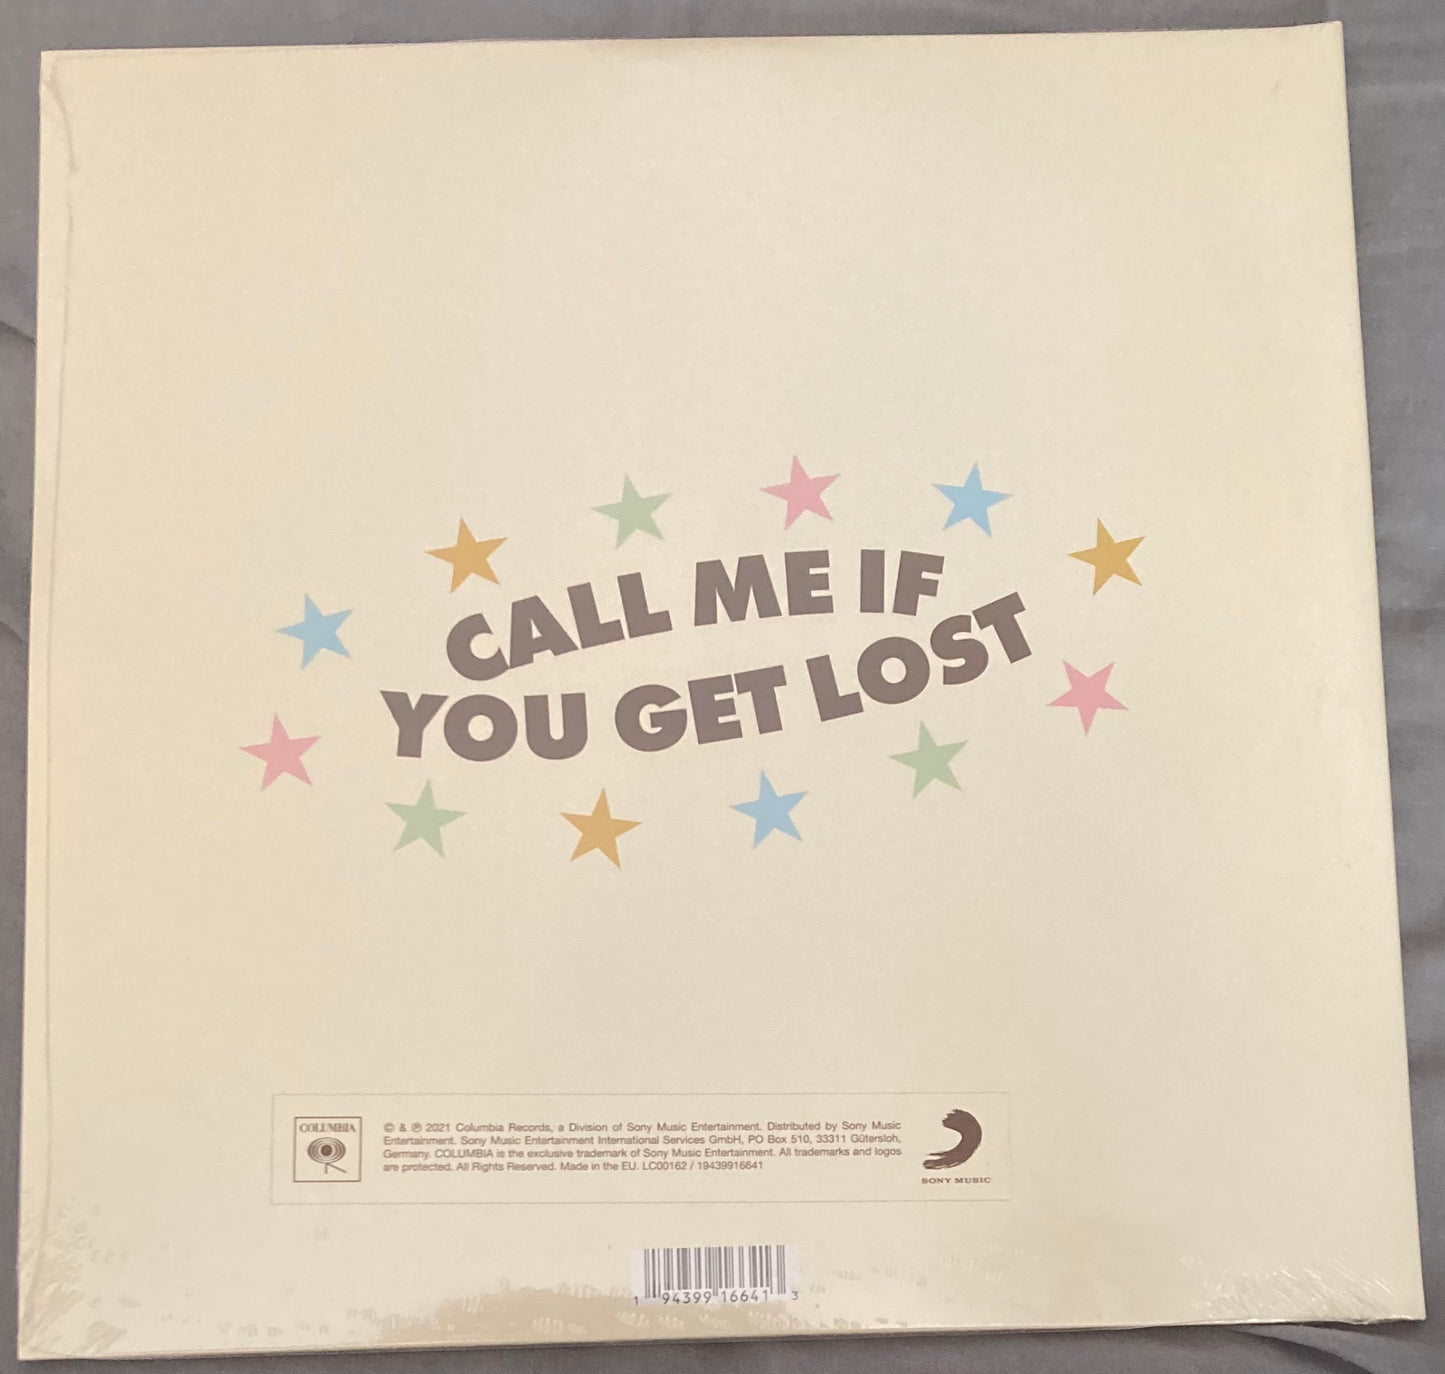 Tyler the Creator - Call Me if You Get Lost (Record LP Vinyl Album)